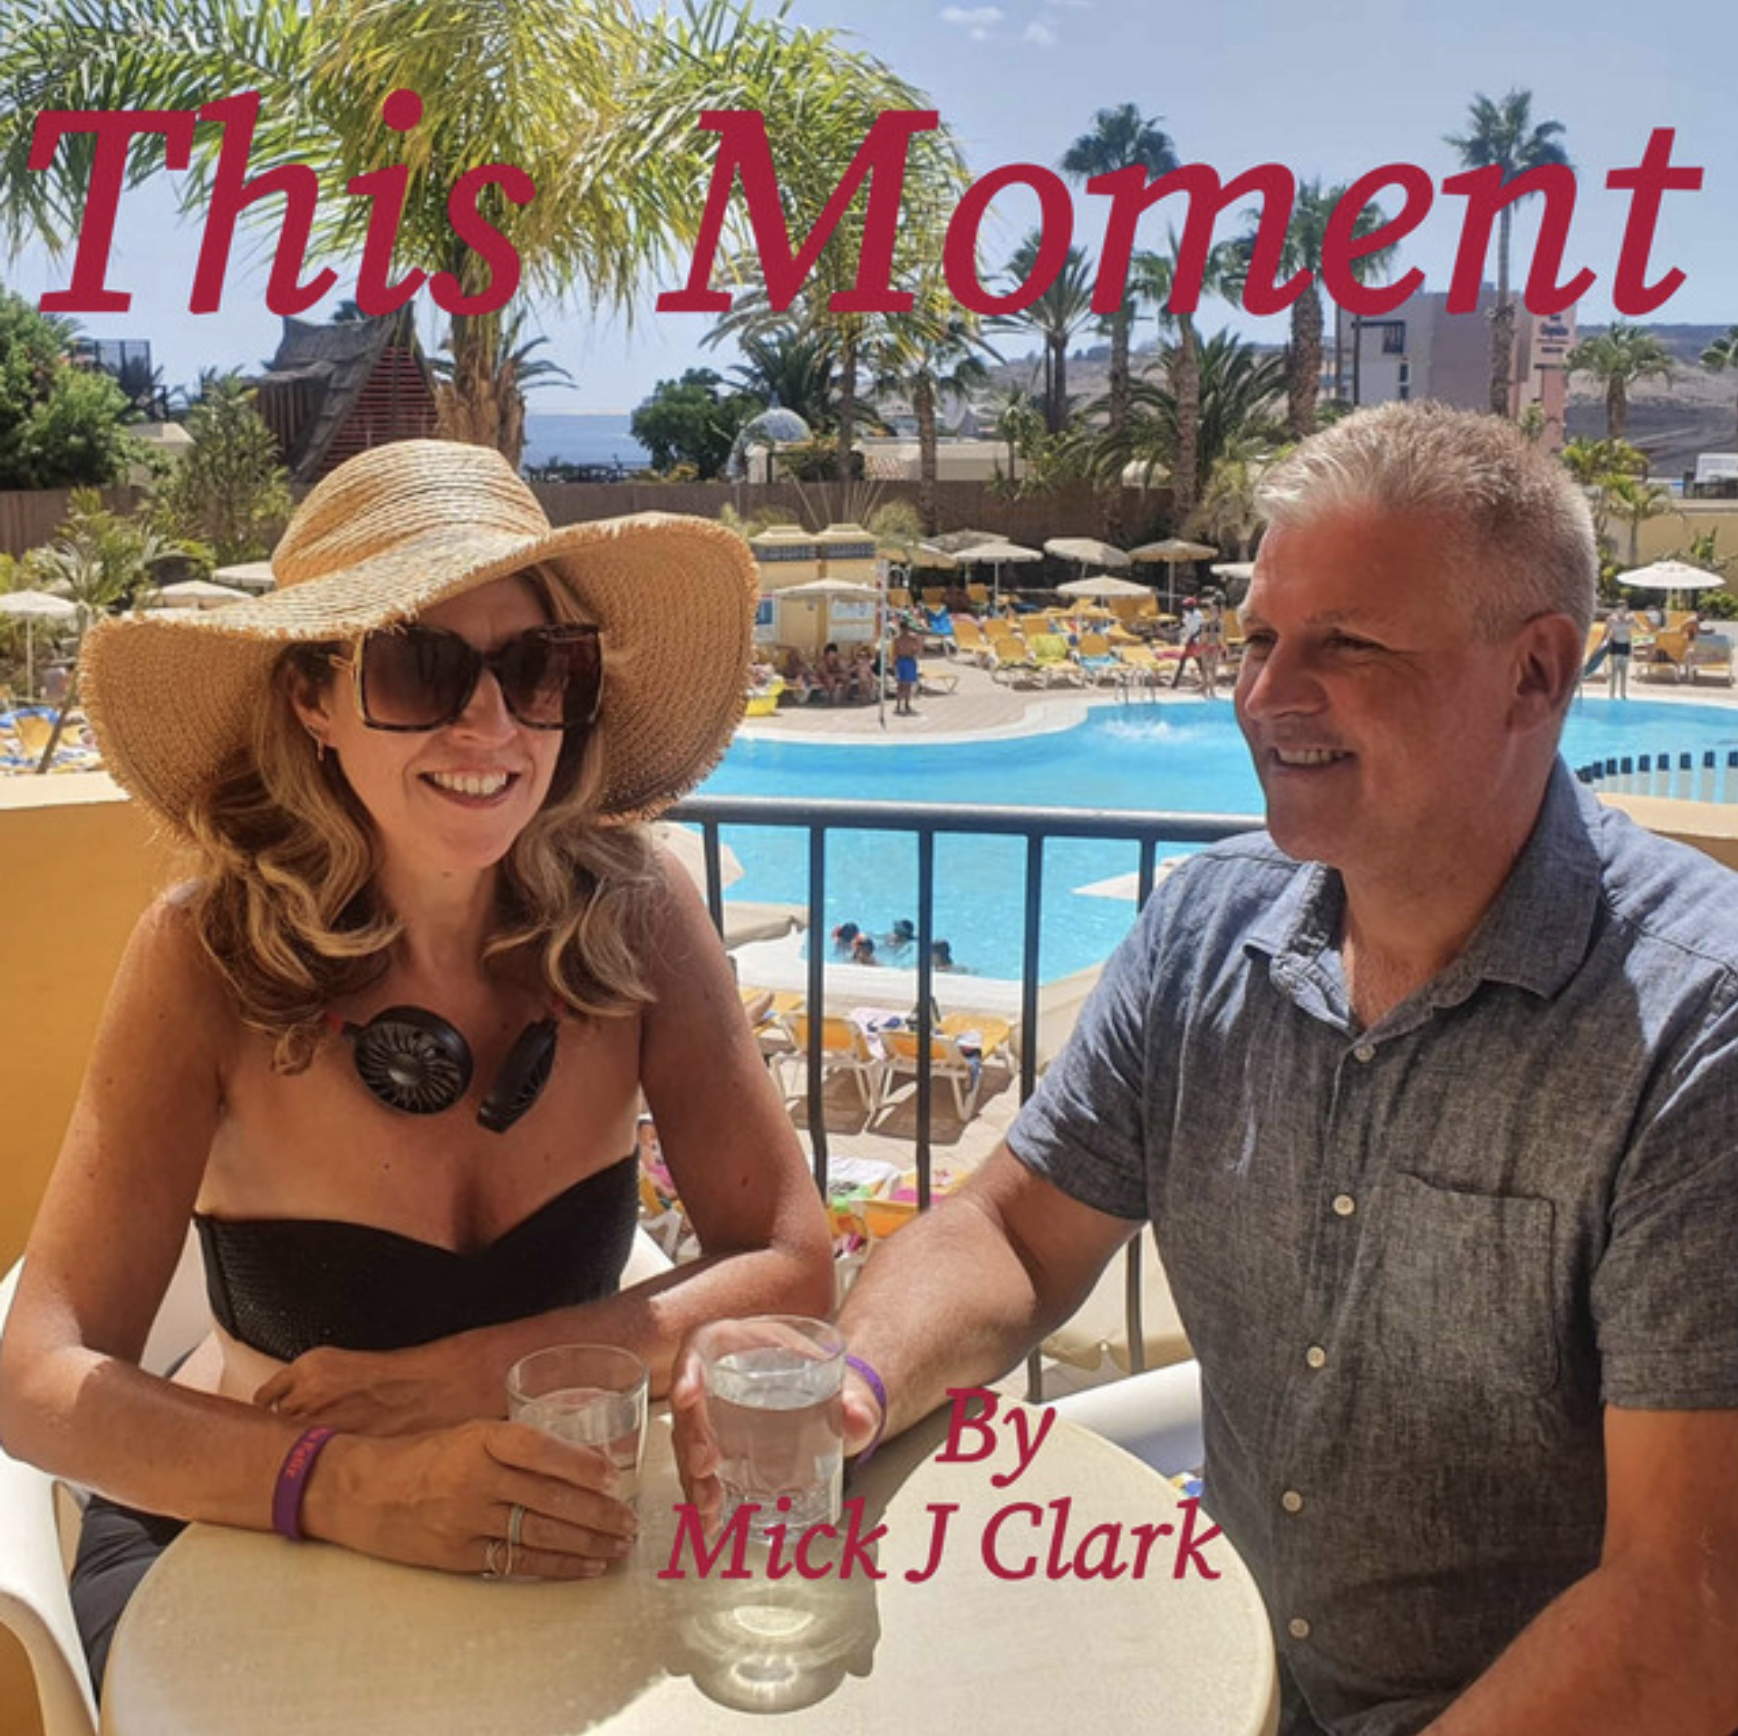 This Moment (Original Single)By Mick J. Clark